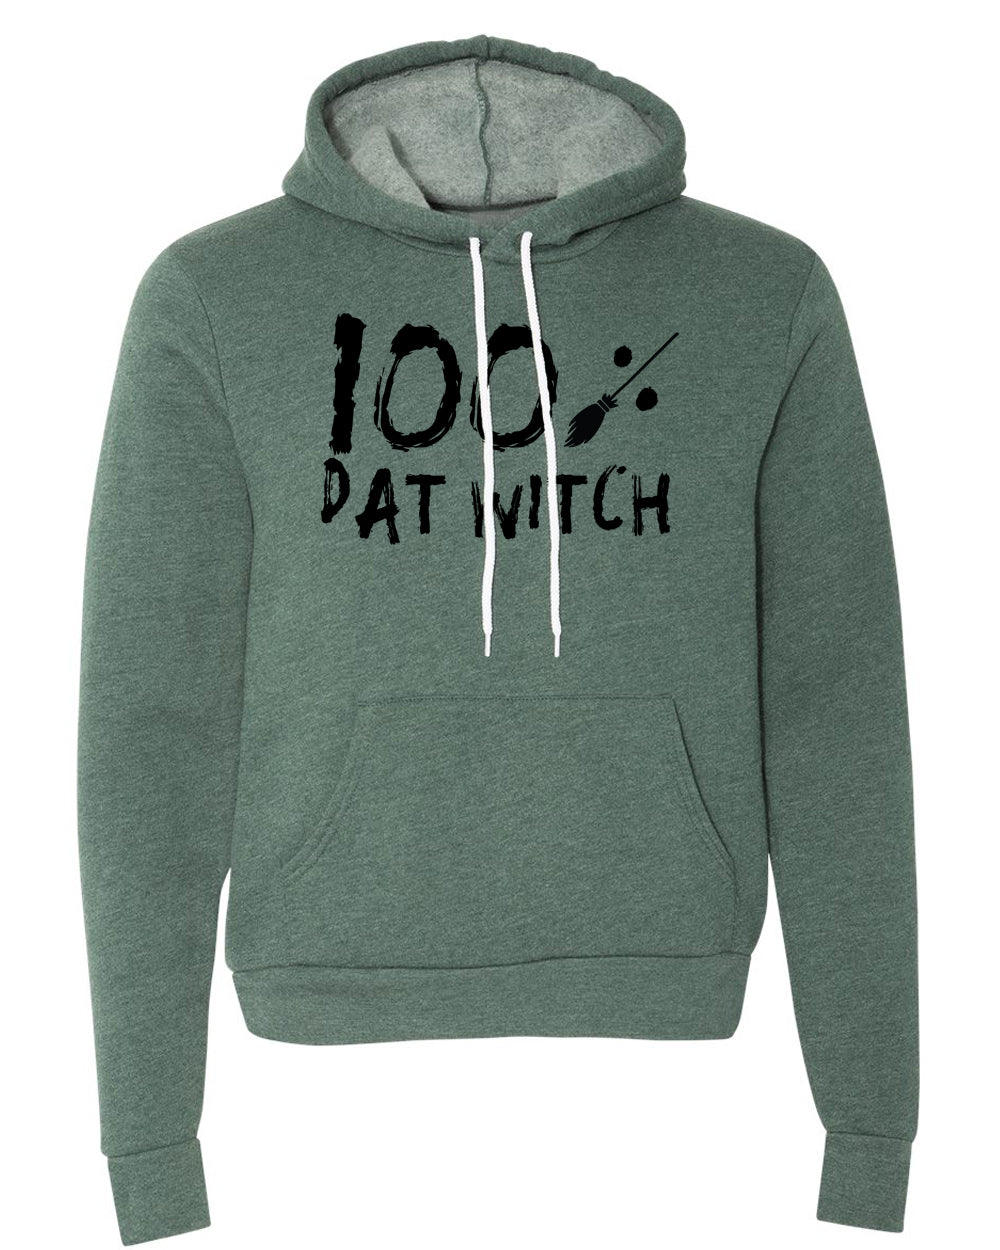 Sweater - 100% Dat Witch  Hoodie Cotton, 's Graphic Hoodie, Halloween Hoodie